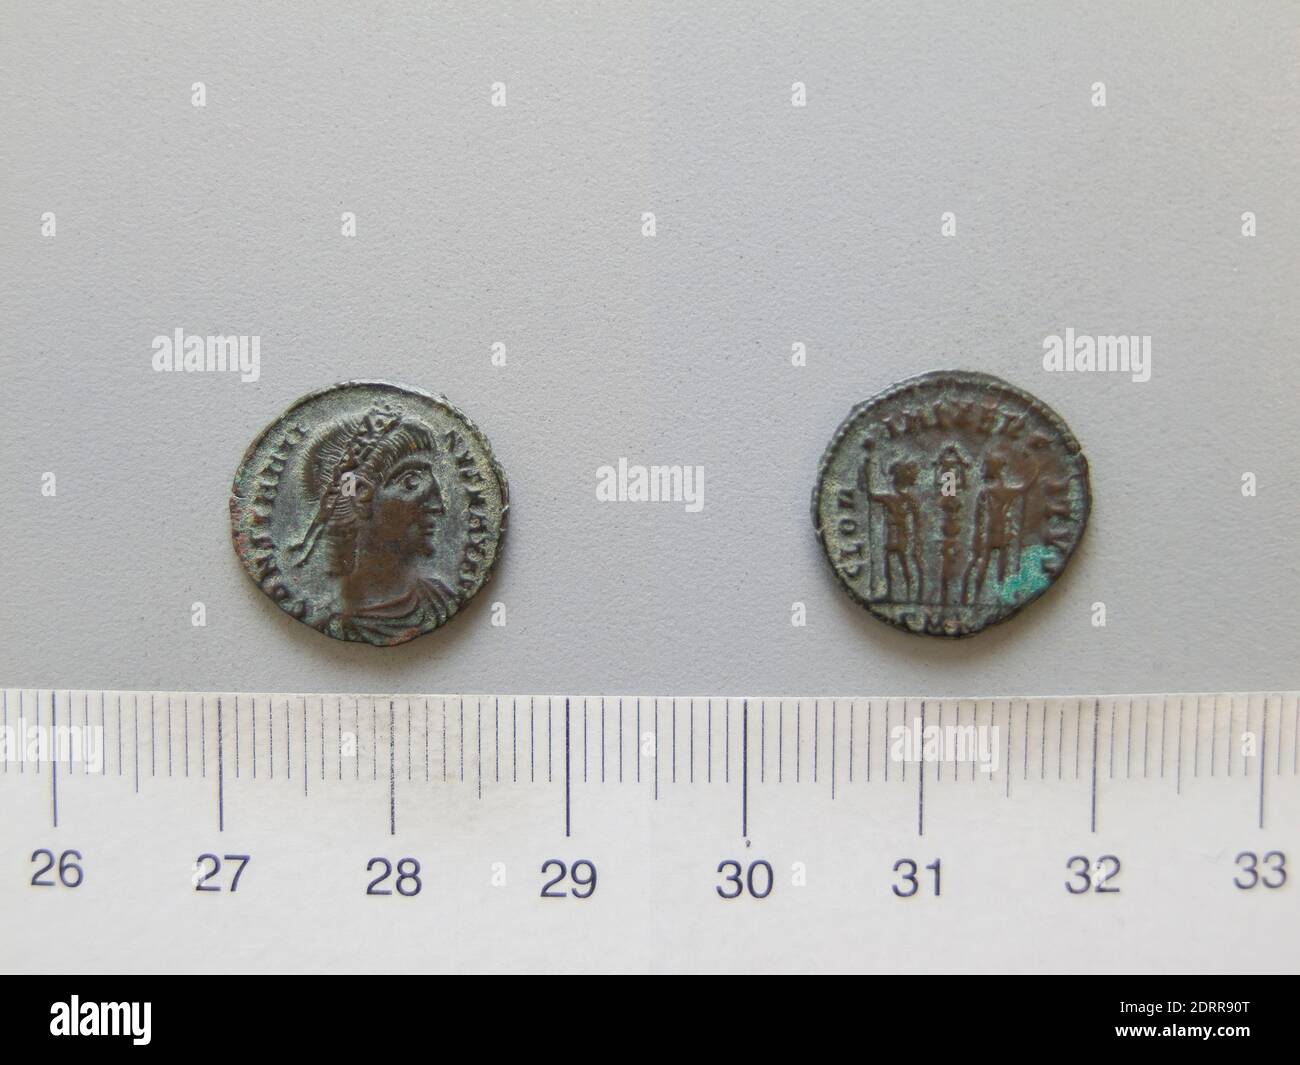 Ruler: Constantine I, Emperor of Rome, A.D. 285–337, ruled A.D. 306–337, Mint: Cyzicus, 1 Nummus of Constantine I, Emperor of Rome from Cyzicus, 335–37, Argentiferous bronze, 1.70 g, 1:00, 16.1 mm, Made in Cyzicus, Mysia, Roman, 4th century, Numismatics Stock Photo